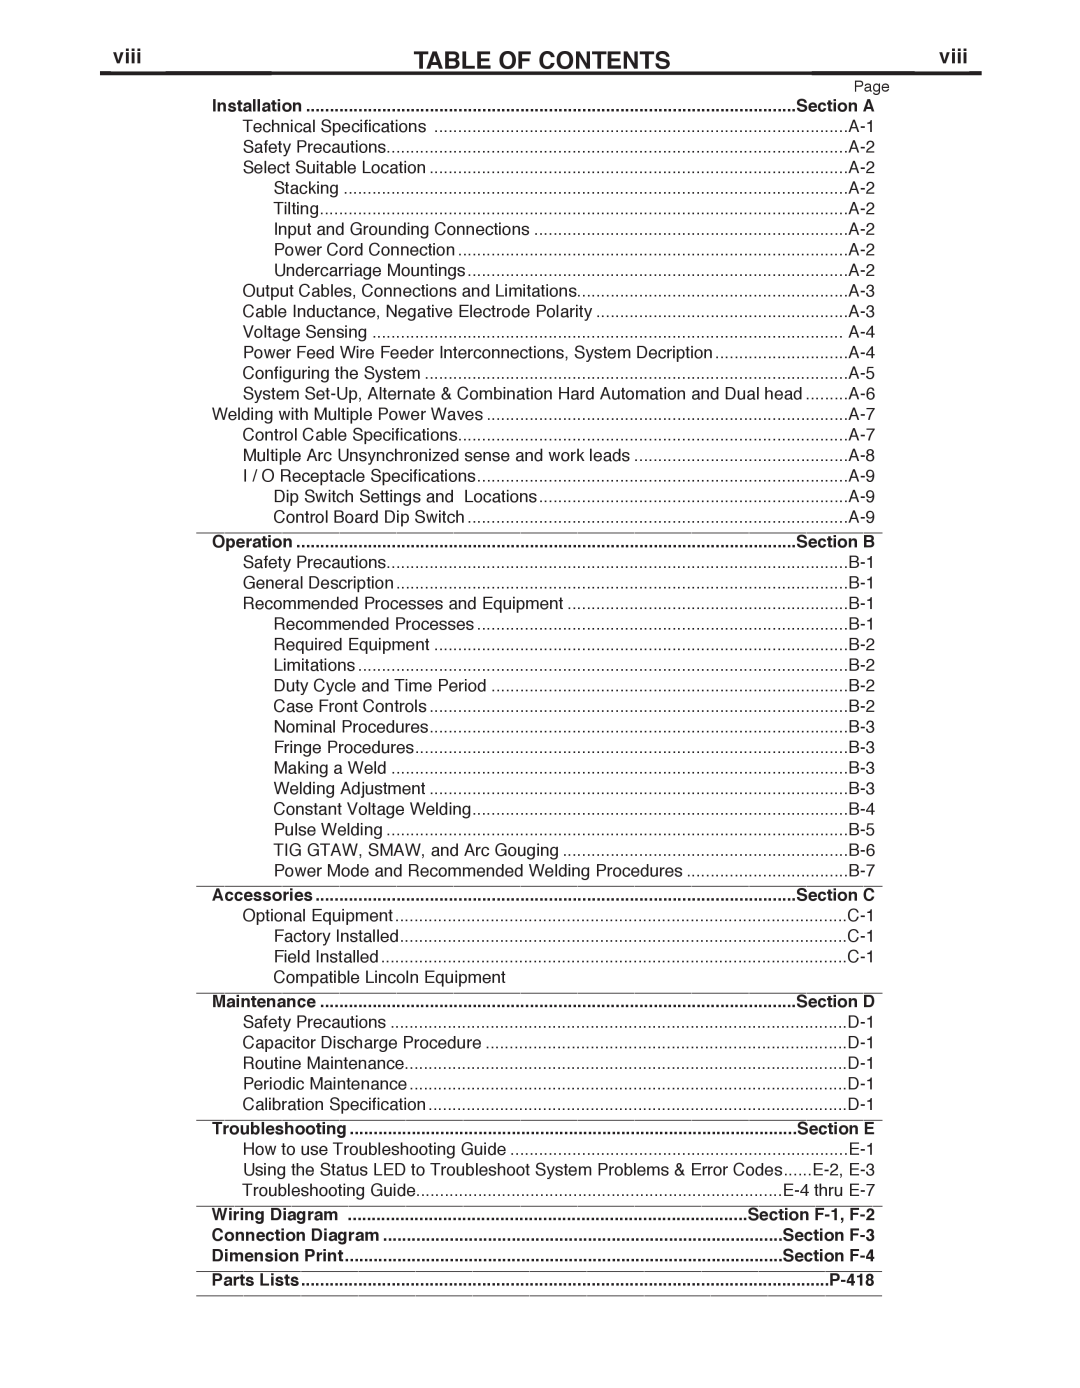 Lincoln Electric IM846-A TAbLE OF CONTENTS, viii, Section A, Section b, Section C, Section D, Section E, Section F-1, F-2 